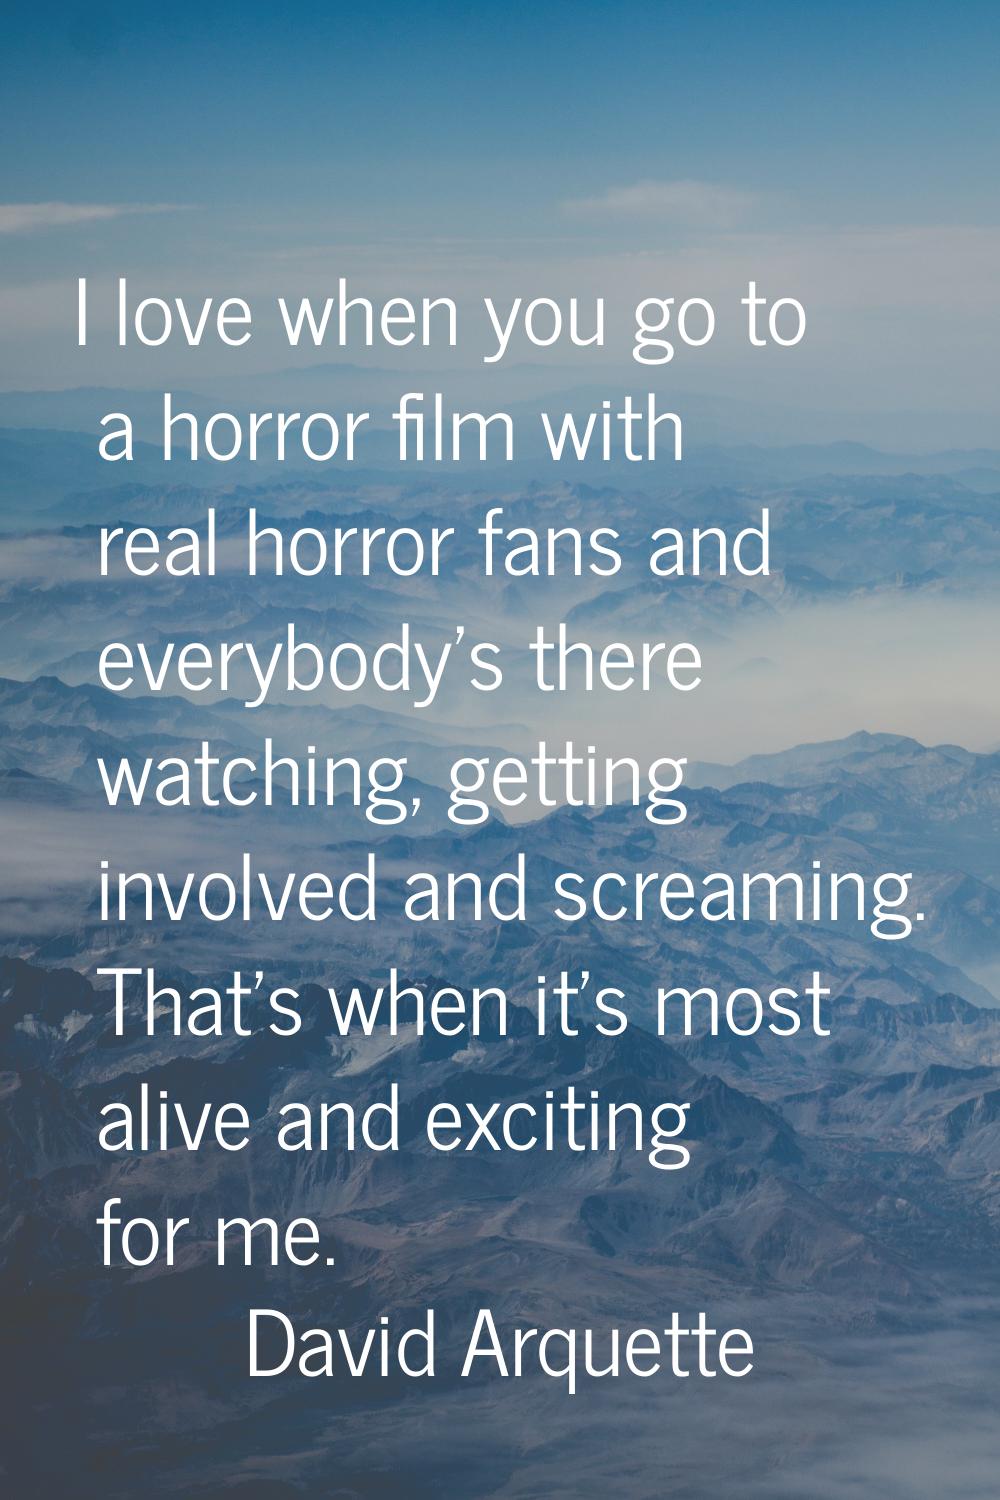 I love when you go to a horror film with real horror fans and everybody's there watching, getting i